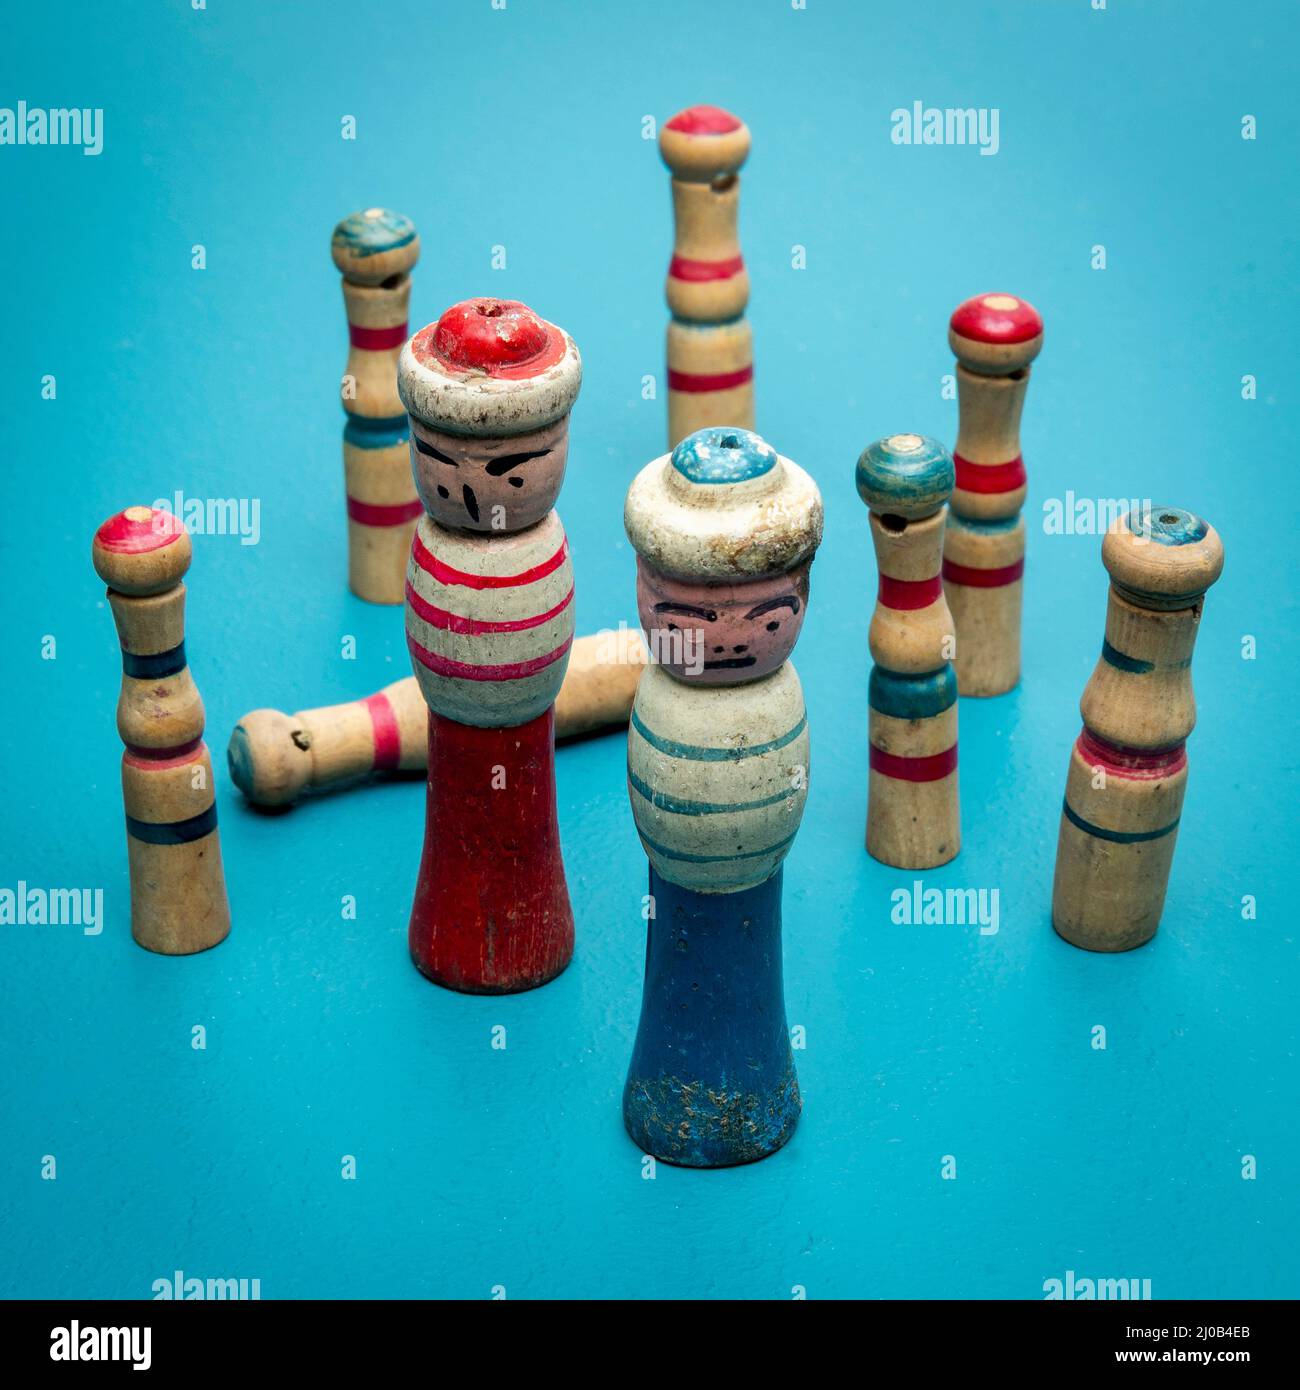 Closeup shot of wooden sailor figurines on a blue background Stock Photo